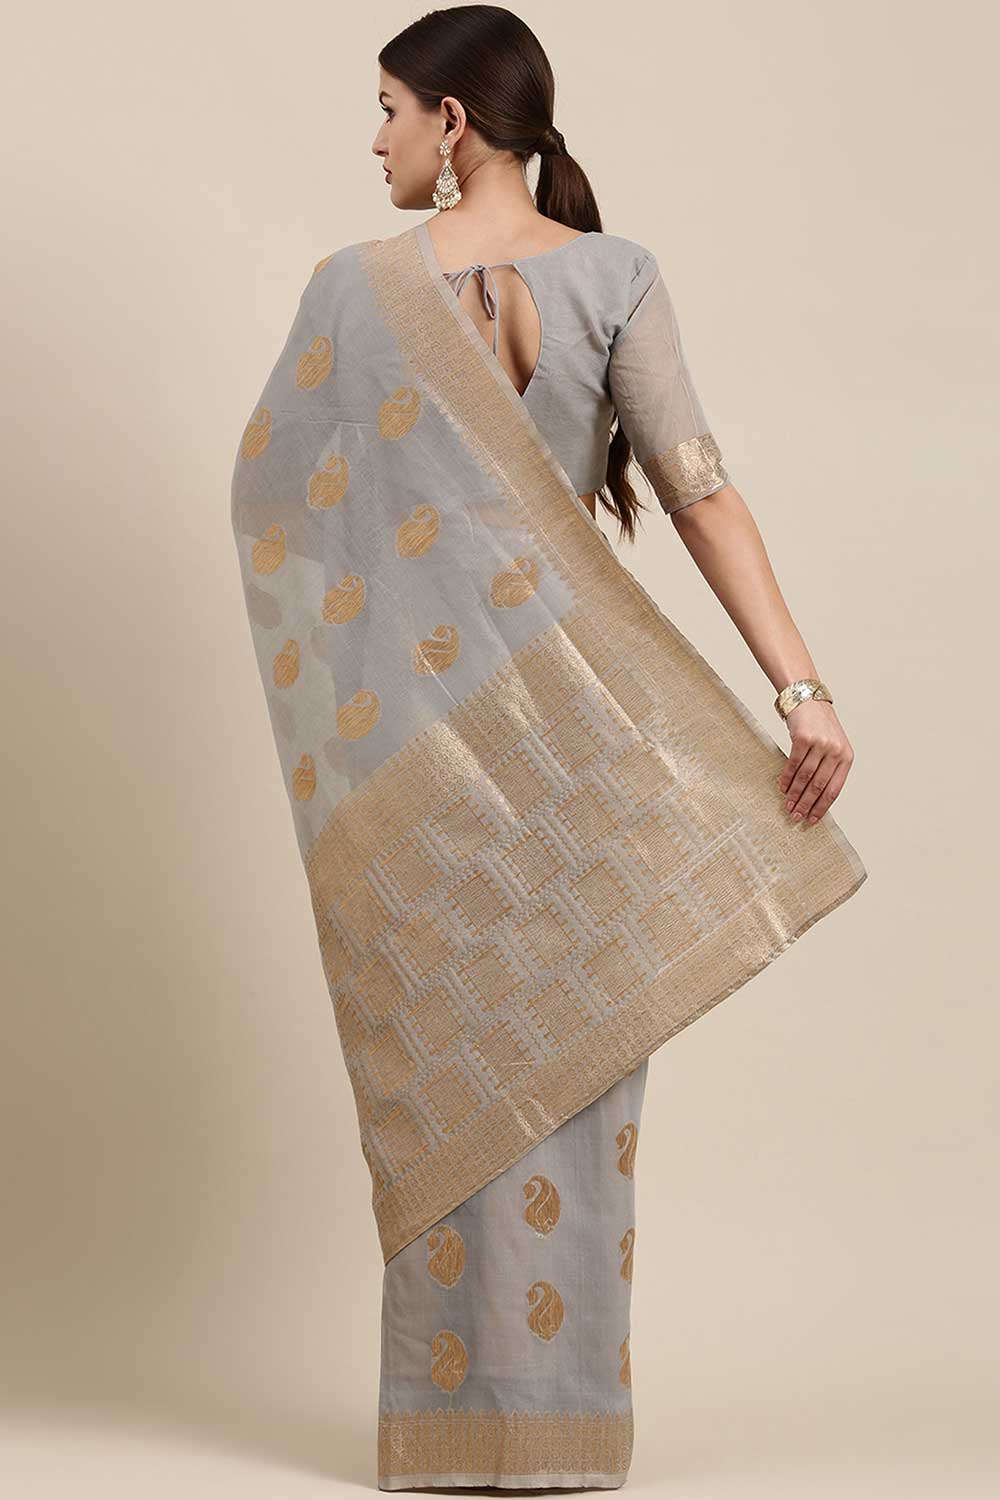 Shop Zoey Grey Bagh Blended Linen One Minute Saree at best offer at our  Store - One Minute Saree